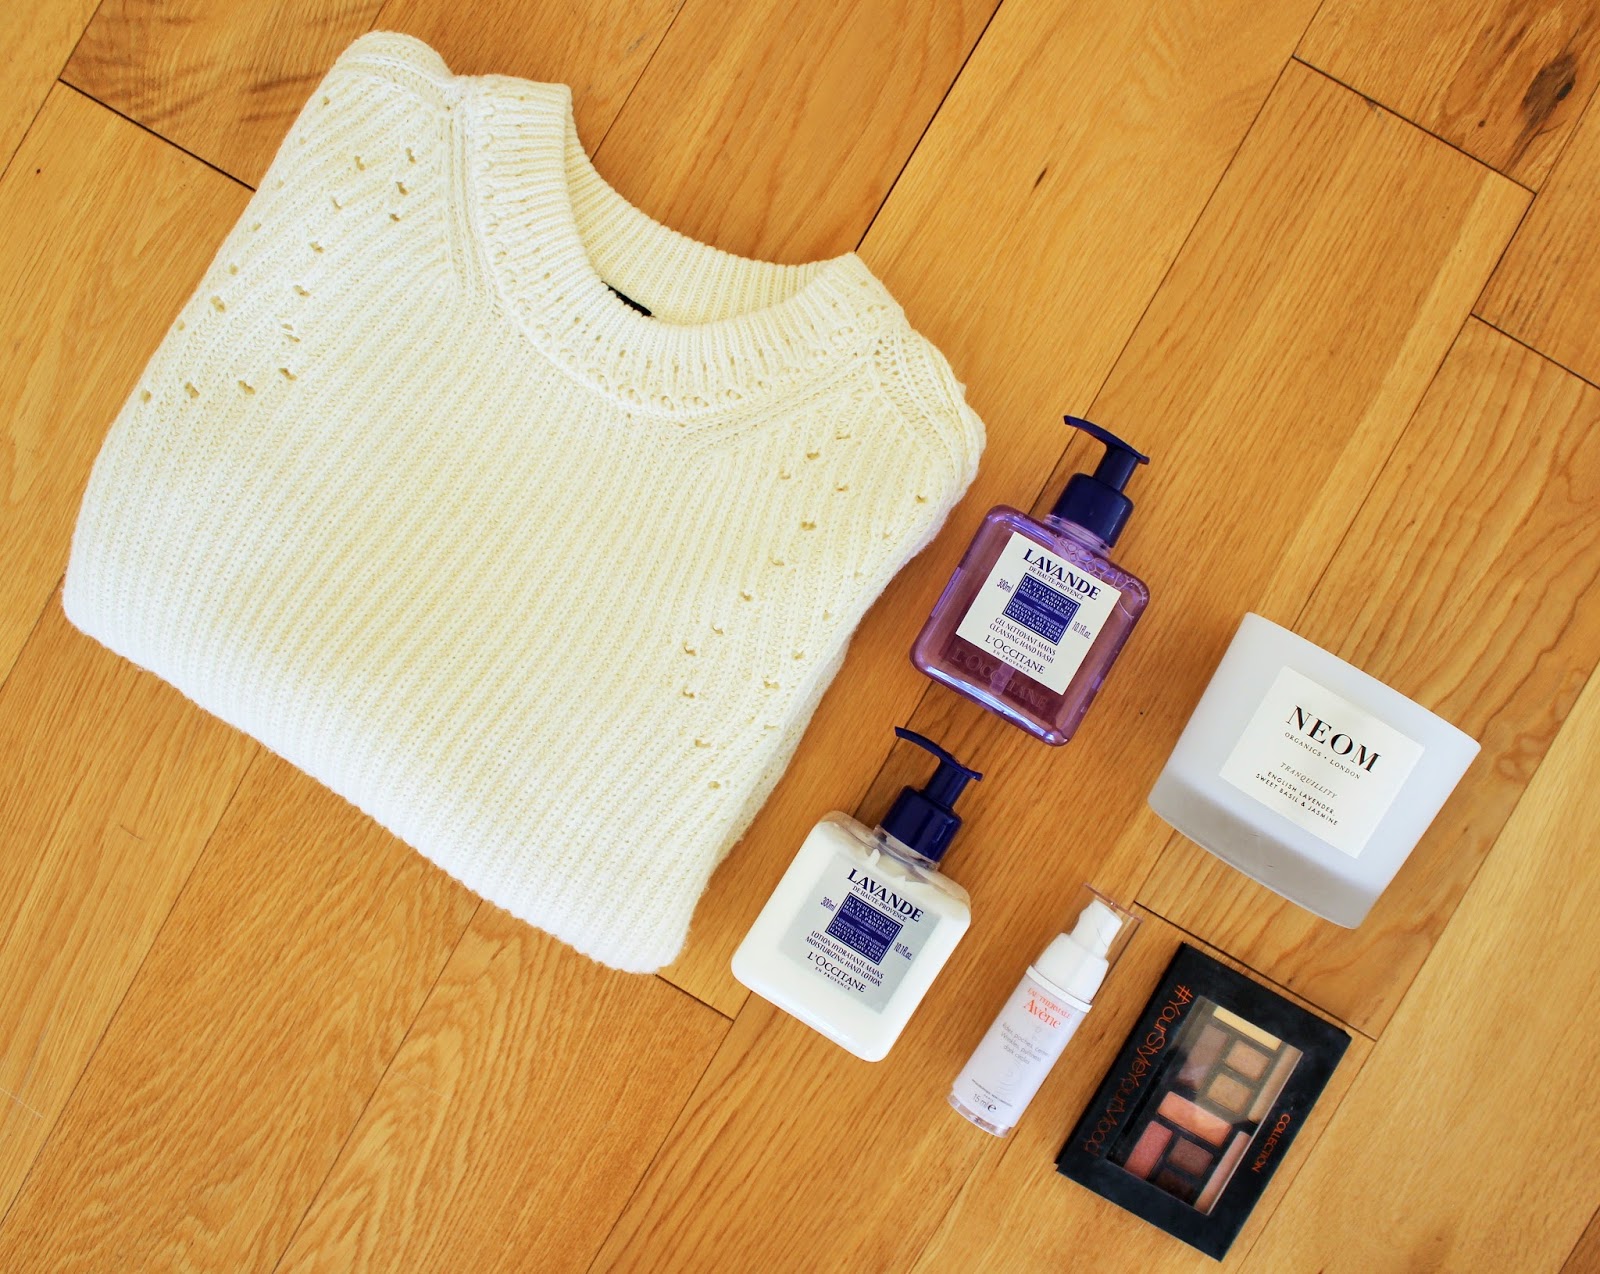 February Favourites - Topshop Jumper, Neom Candle, L'Occitane Hand Wash and Hand Cream, Collection Eyeshadow Palette, Avene Eye Cream